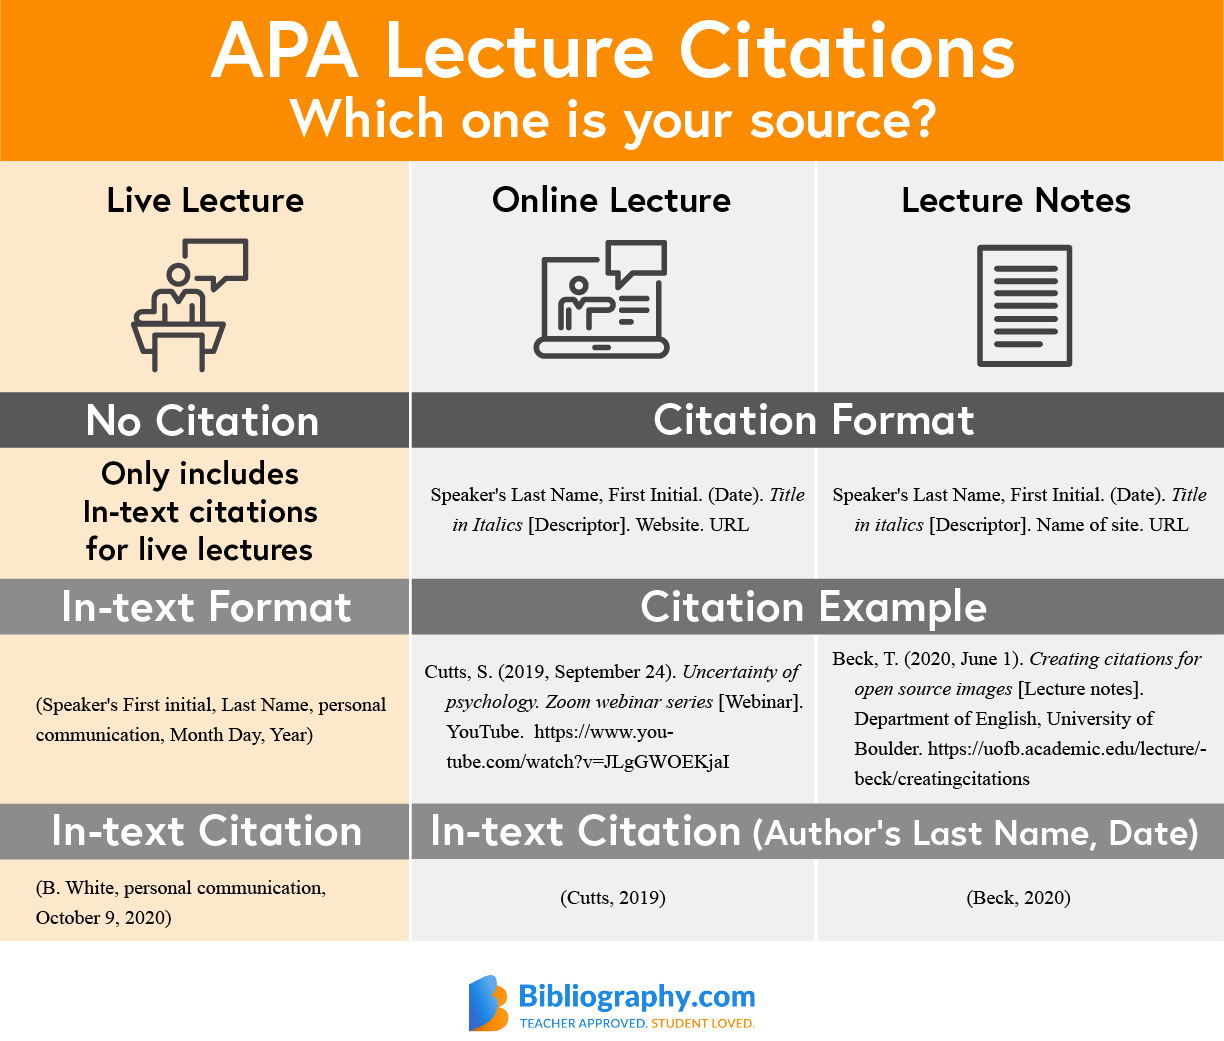 cite different sources of lectures in APA